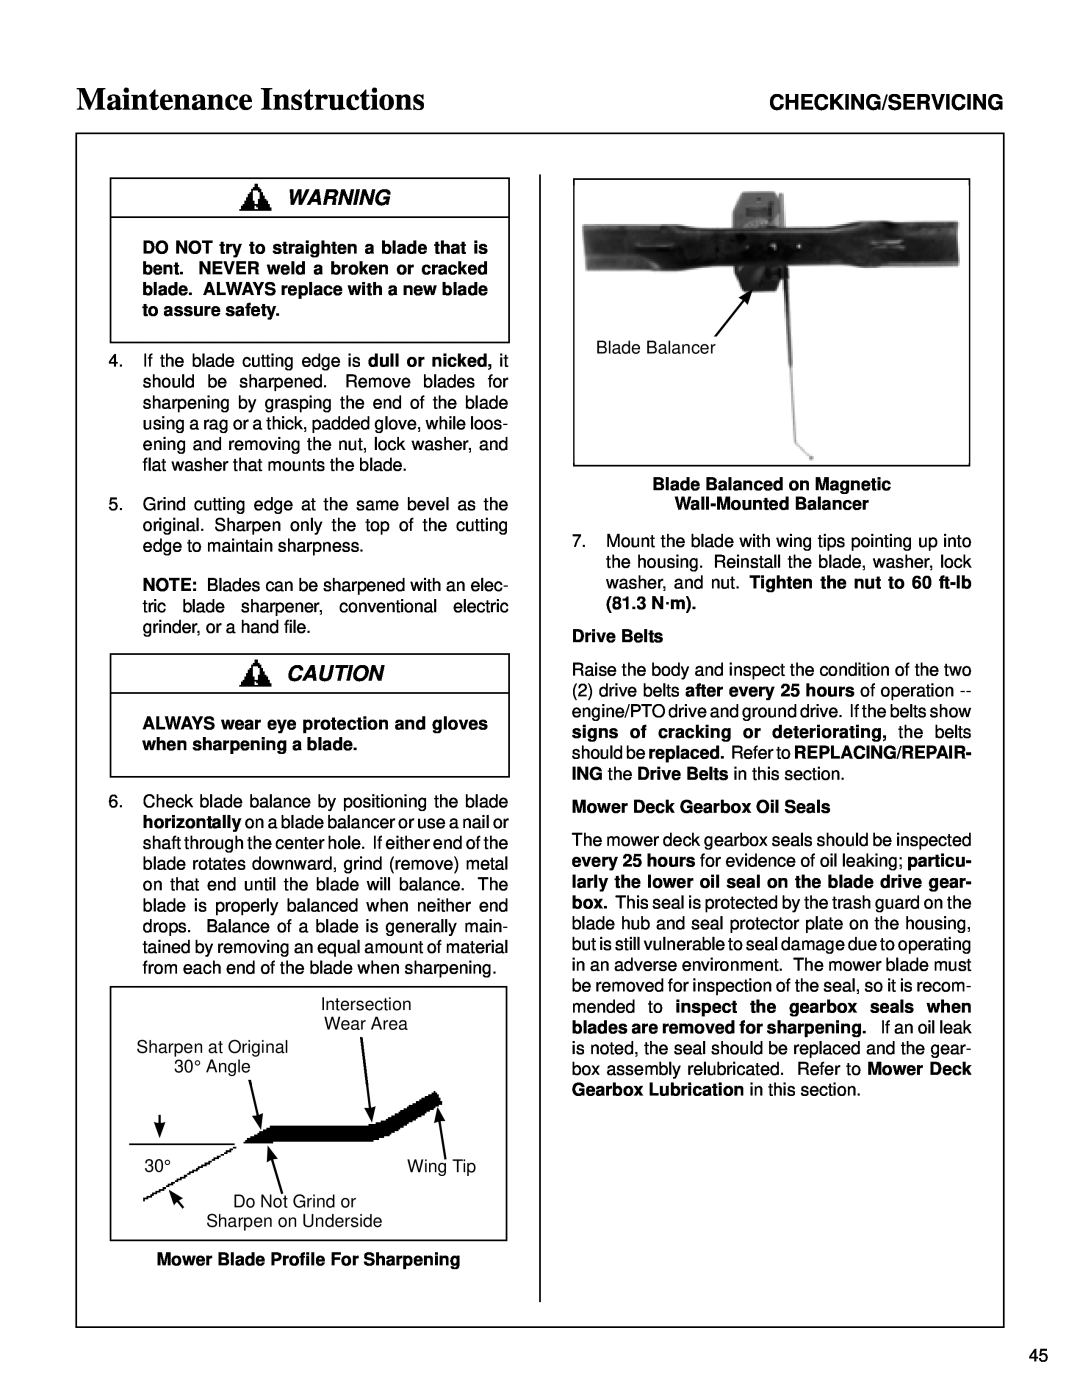 Briggs & Stratton MB (18 HP) Maintenance Instructions, Checking/Servicing, Mower Blade Profile For Sharpening, Drive Belts 